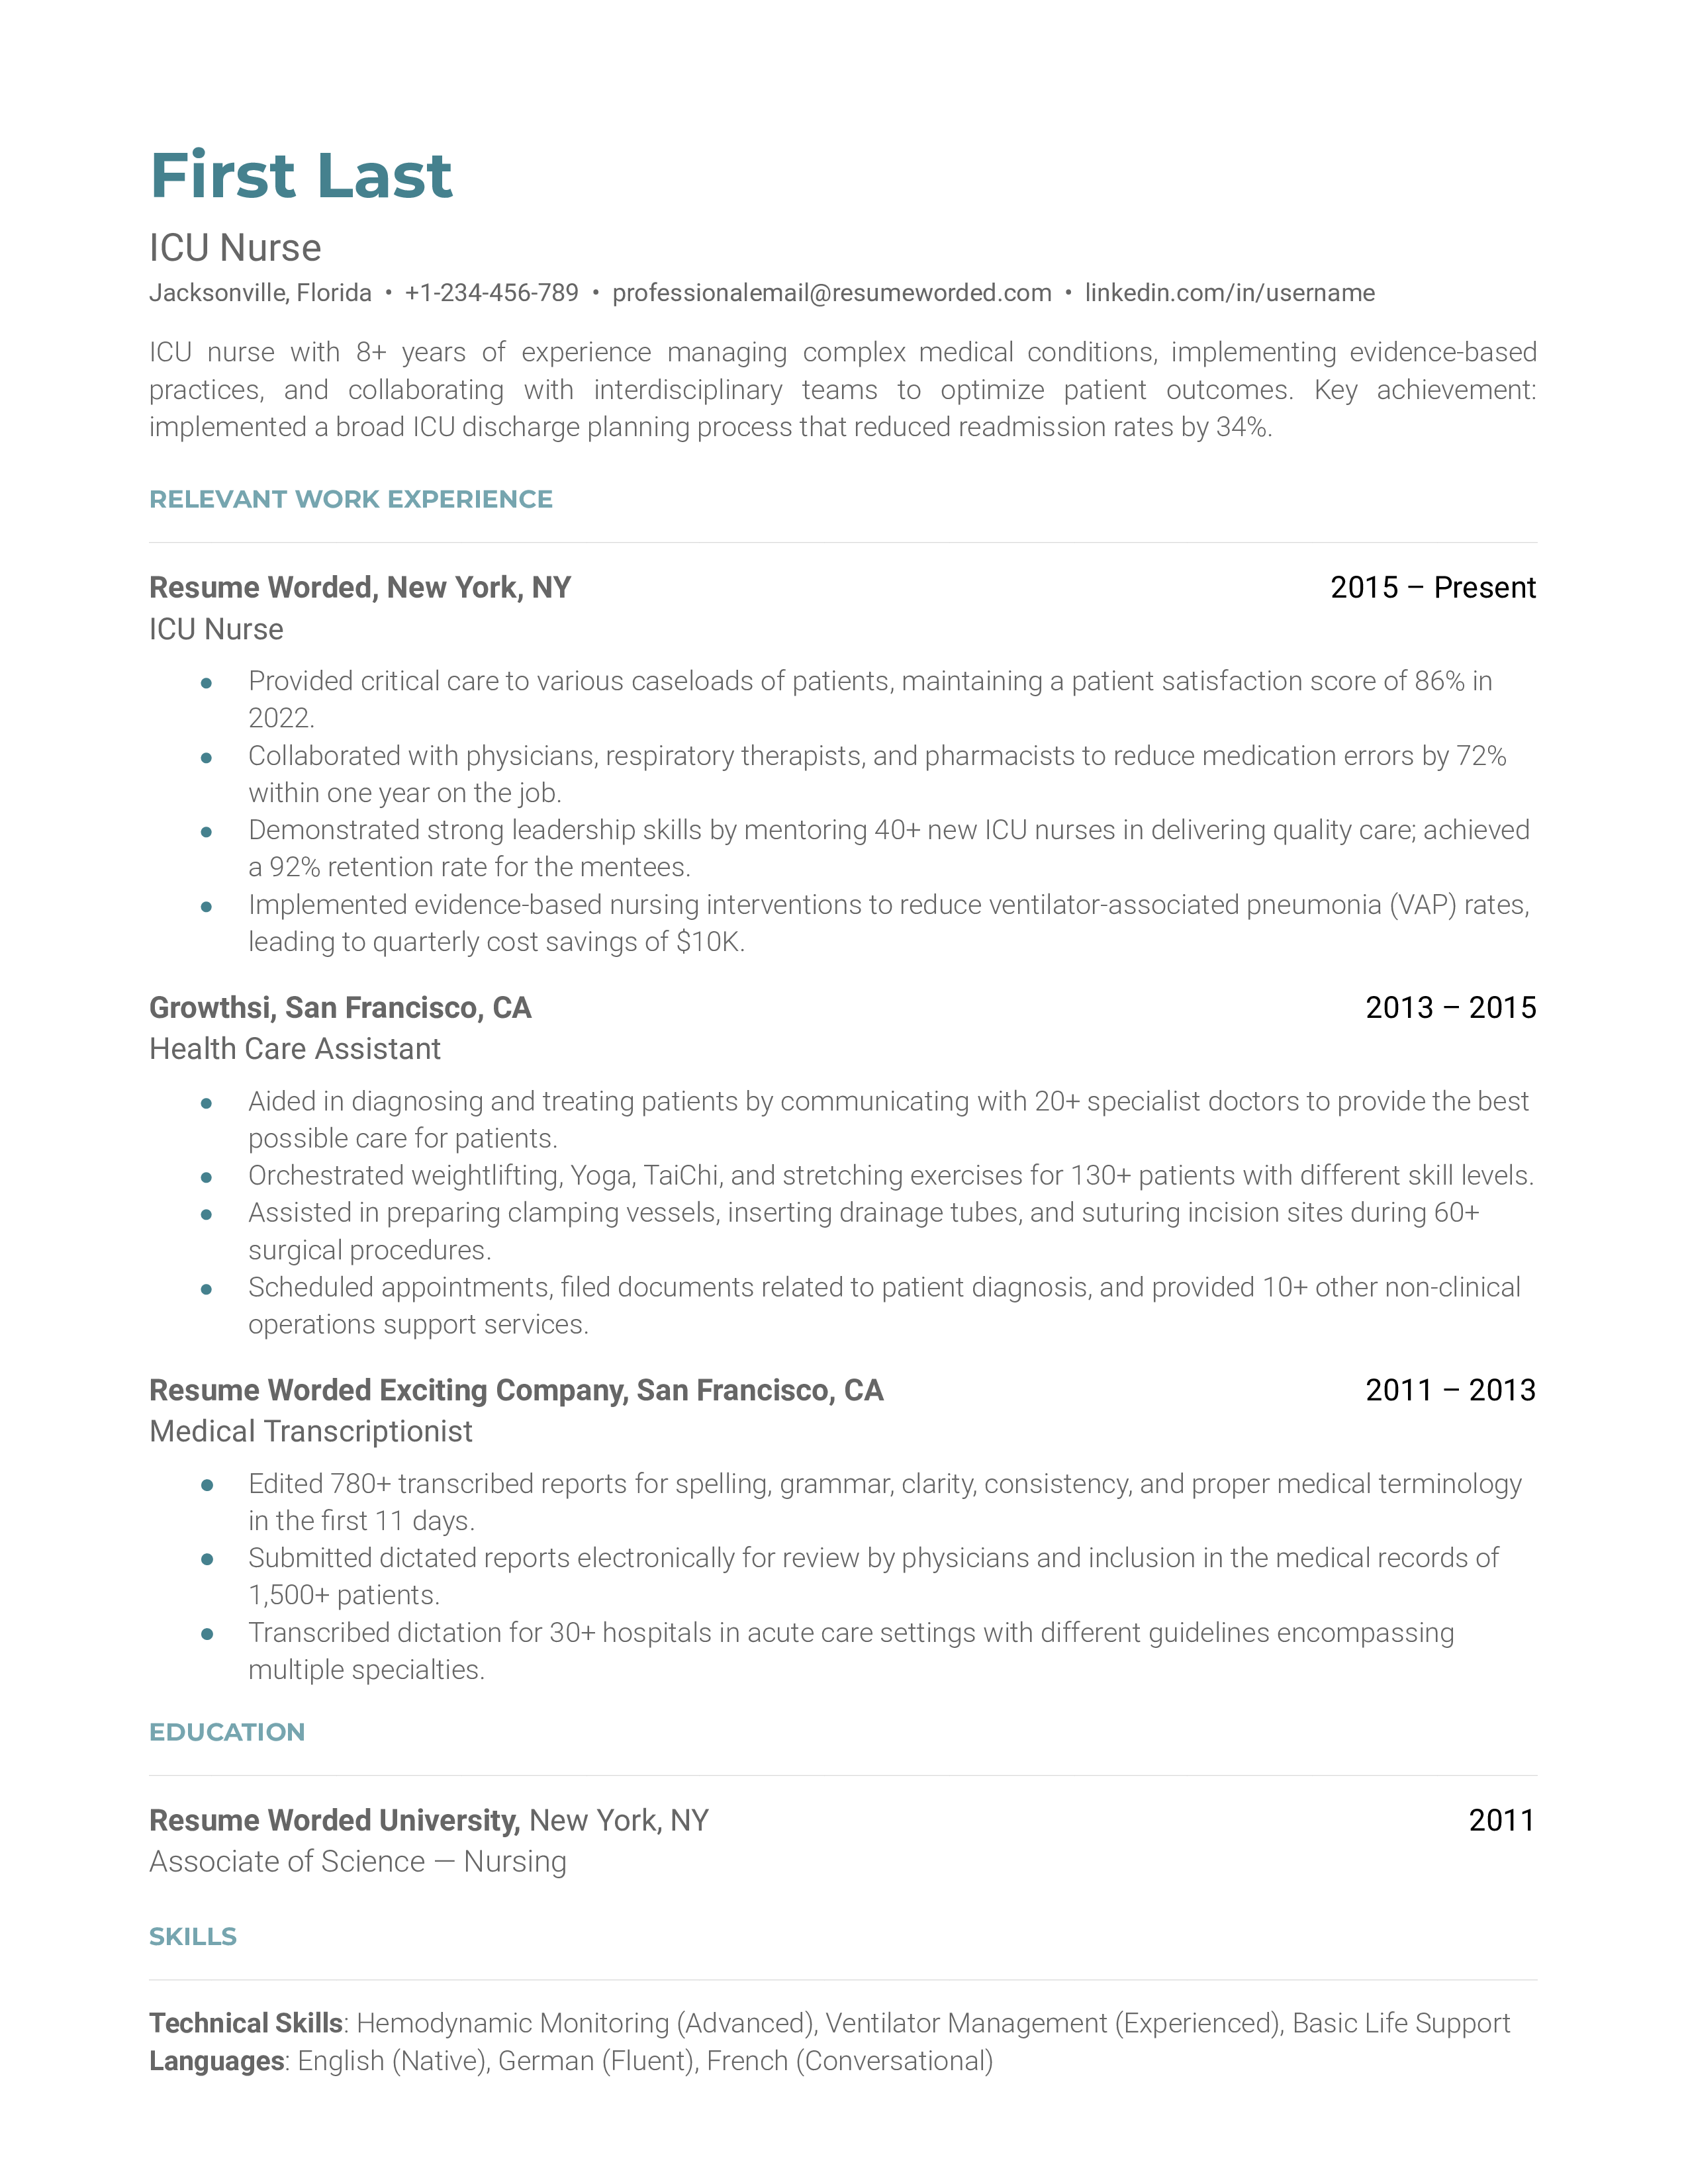 A well-structured CV for ICU nurse role, showcasing experience, skills, and certifications.